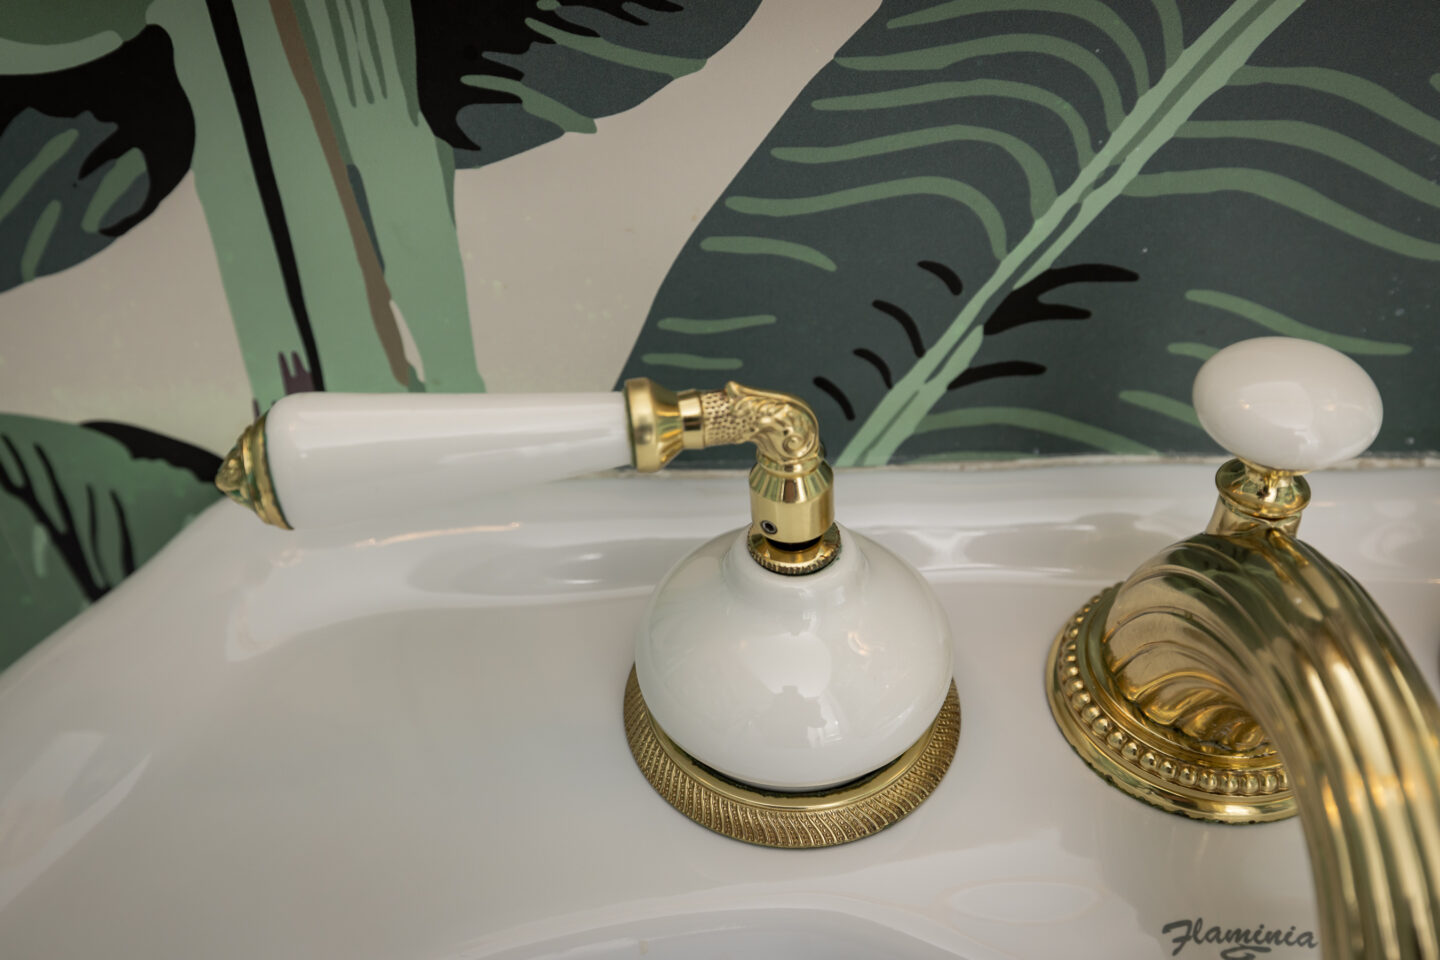 Hollywood Regency Powder Room Reveal with Phylrich Faucet